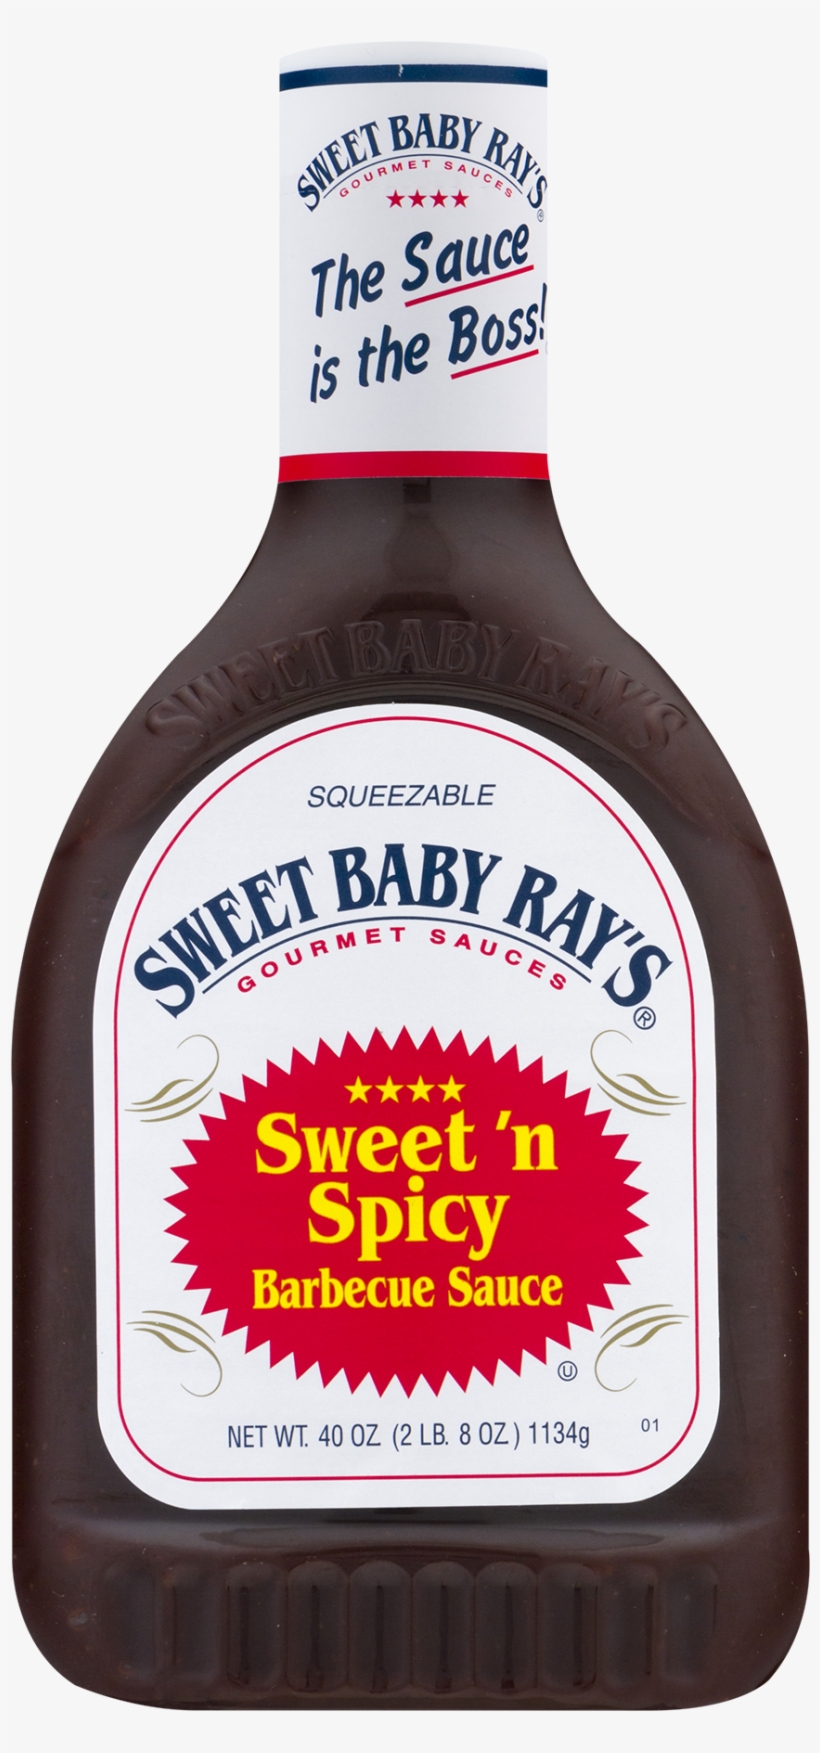 Sweet Baby Rays, transparent png #5877361